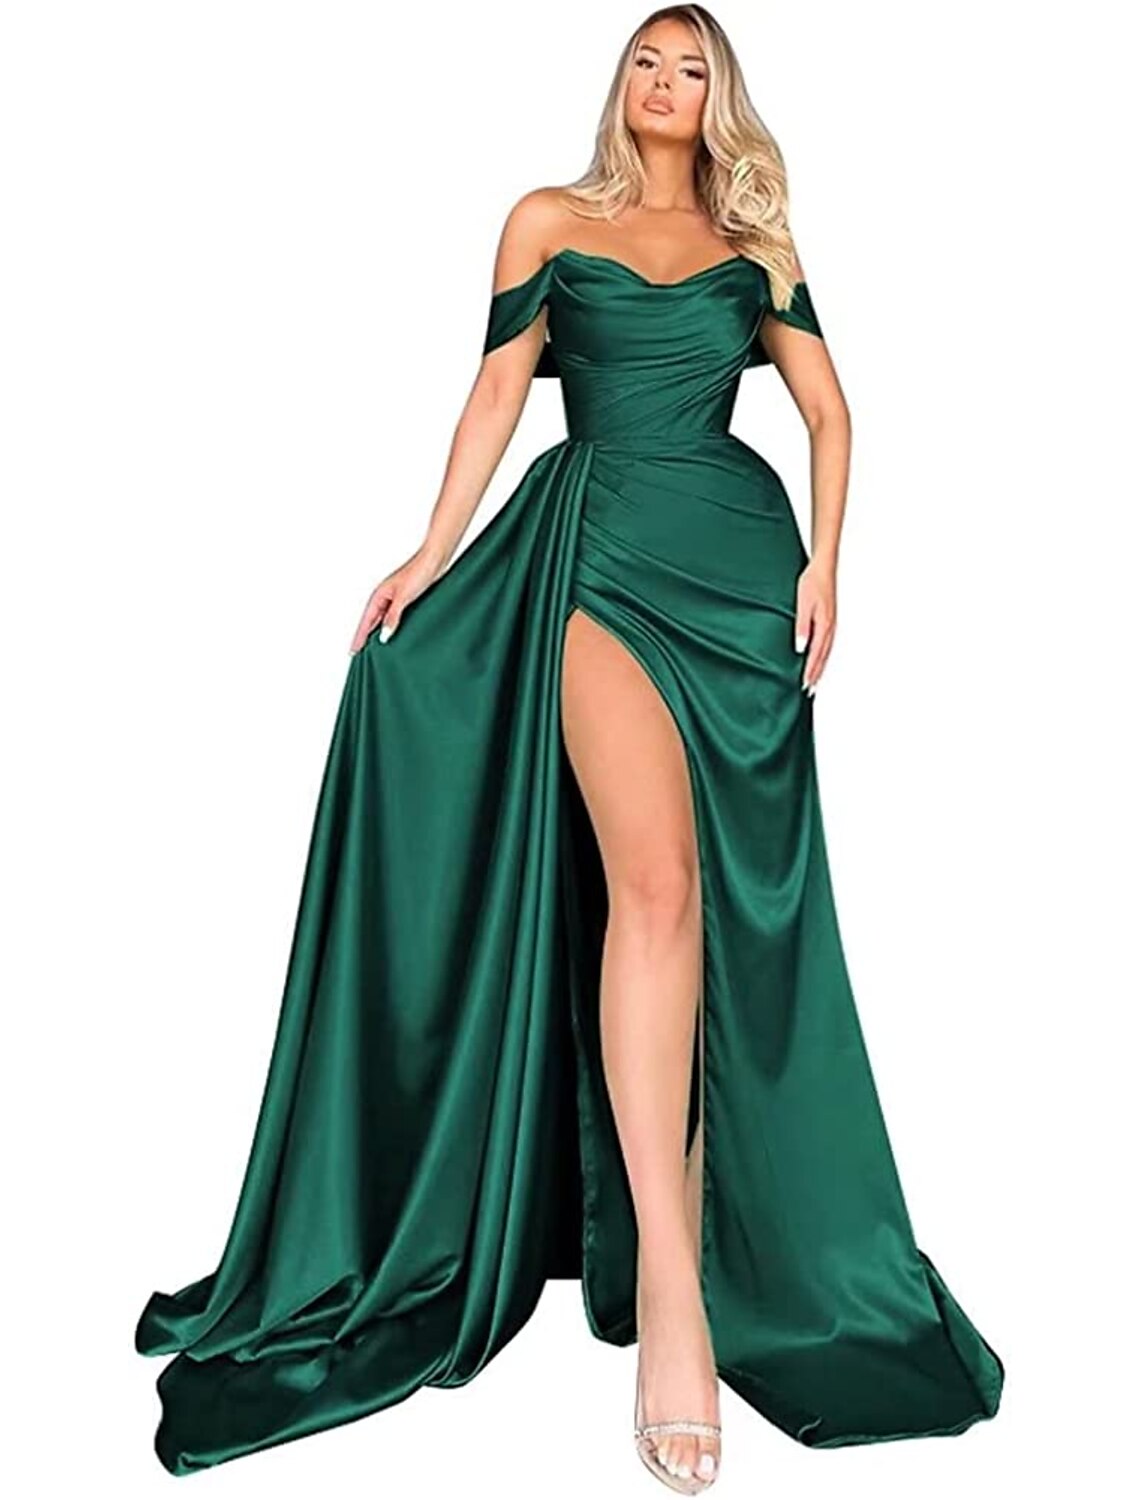 Mermaid / Trumpet Prom Dresses Empire Dress Formal Sweep / Brush Train Sleeveless Off Shoulder Imitation Silk Backless with Ruched Slit